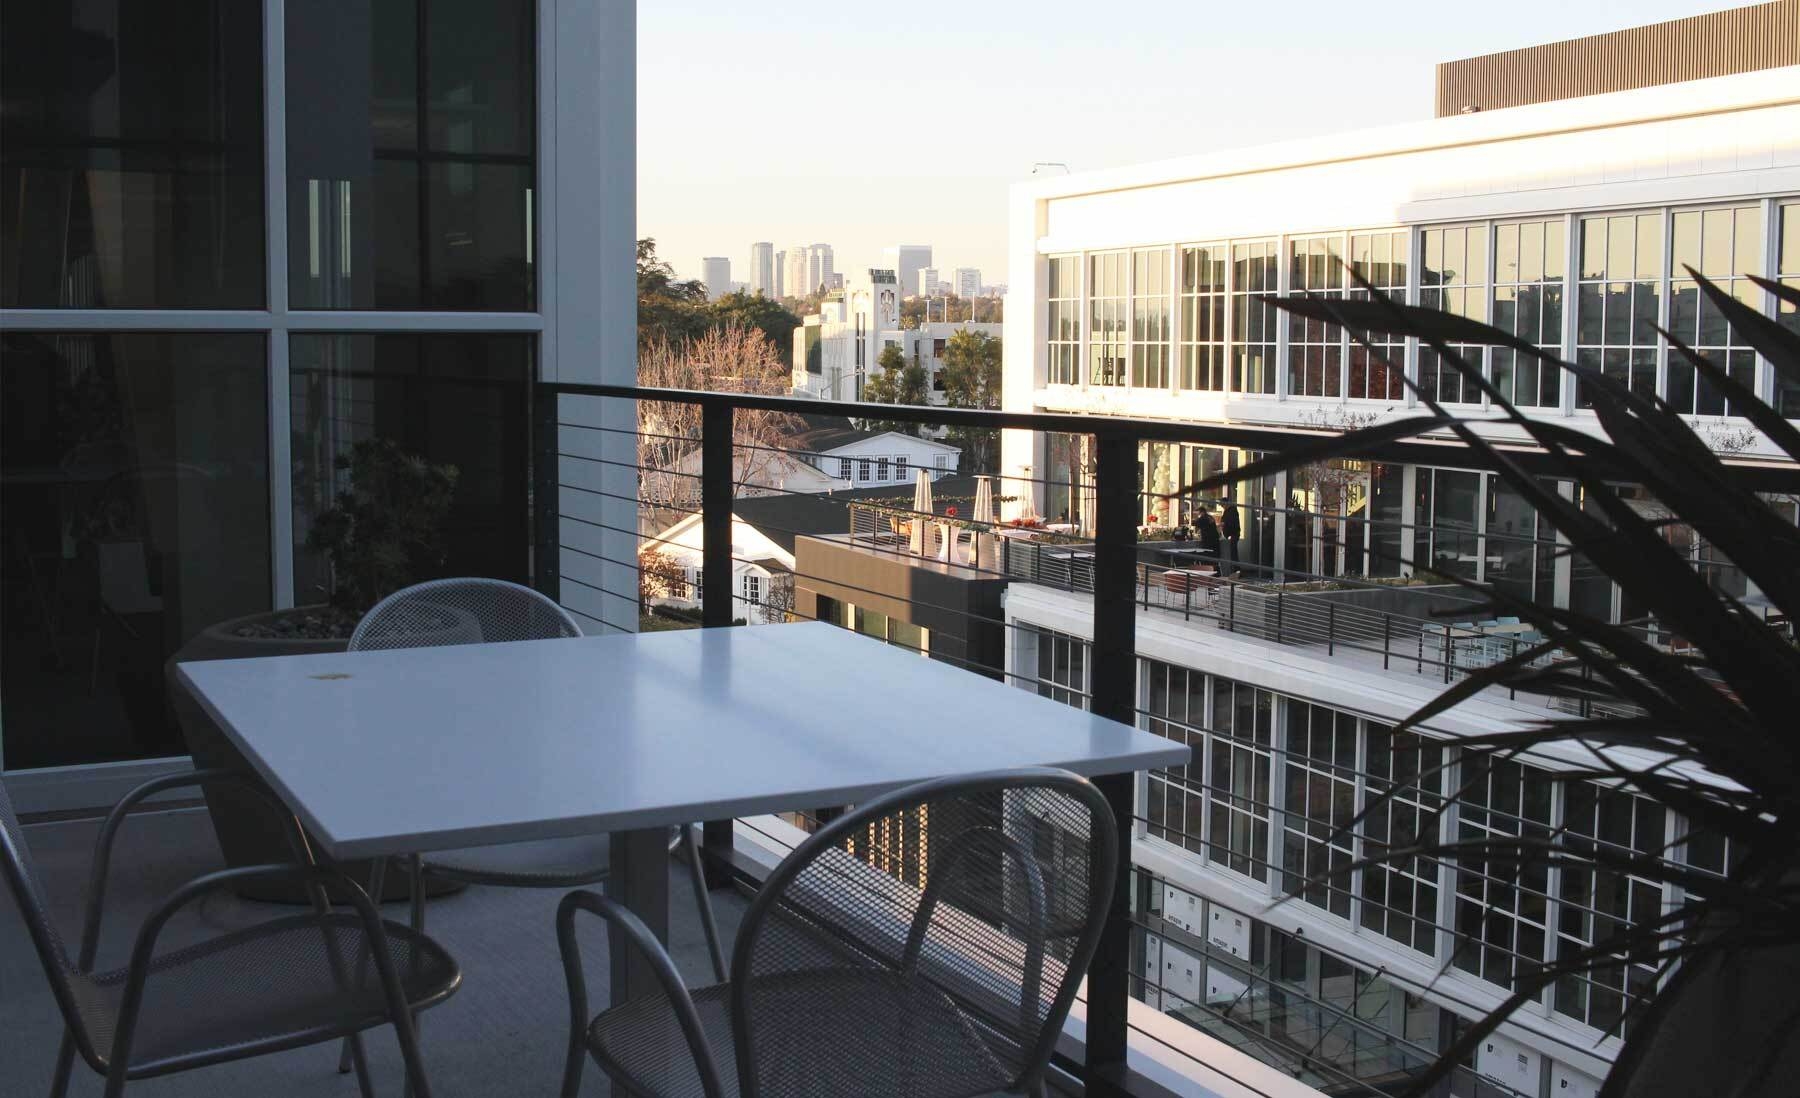 An image of a deck overlooking the Amazon Culver City campus